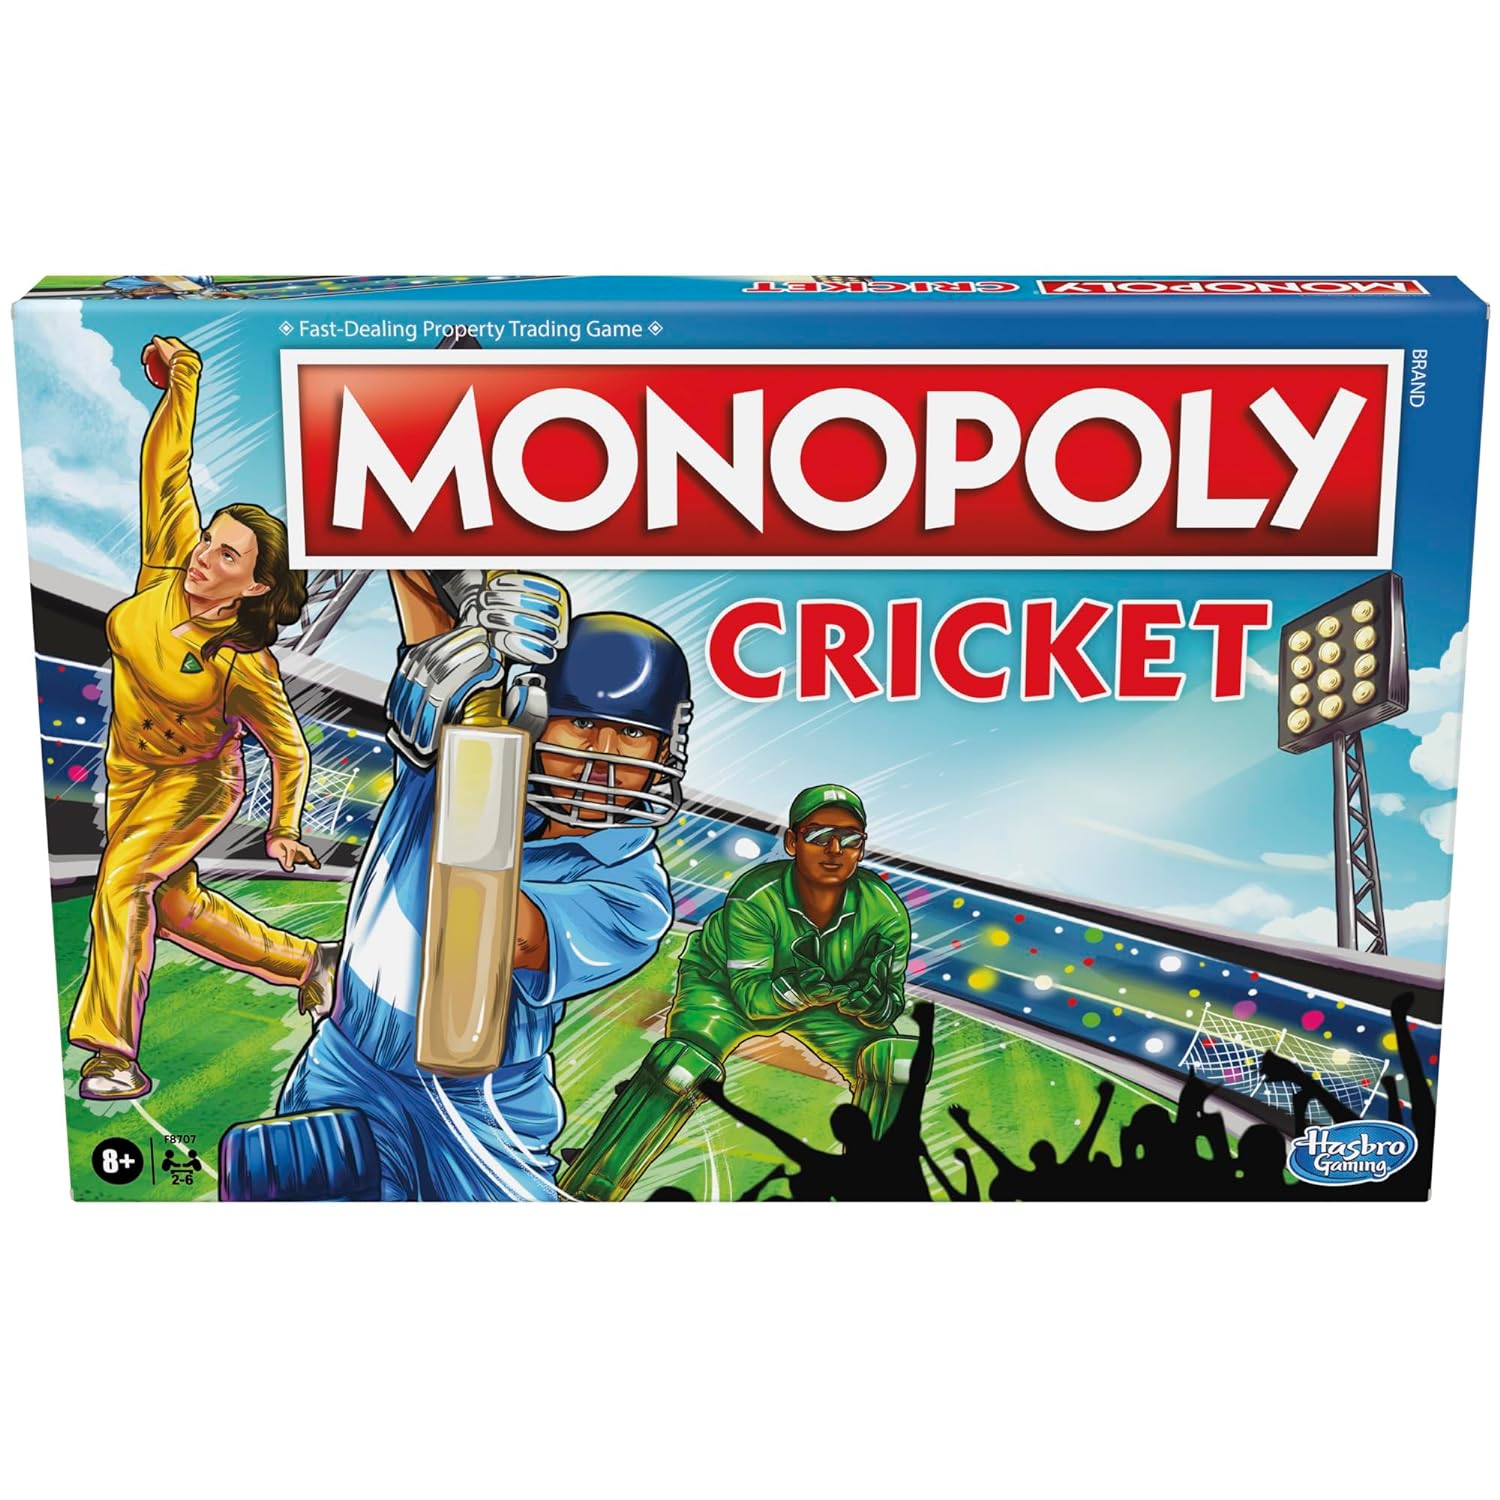 Monopoly Cricket Themed Board Game | For Families and Kids | Ages 8+ | 2 to 6 Players Board Game Accessories Board Game